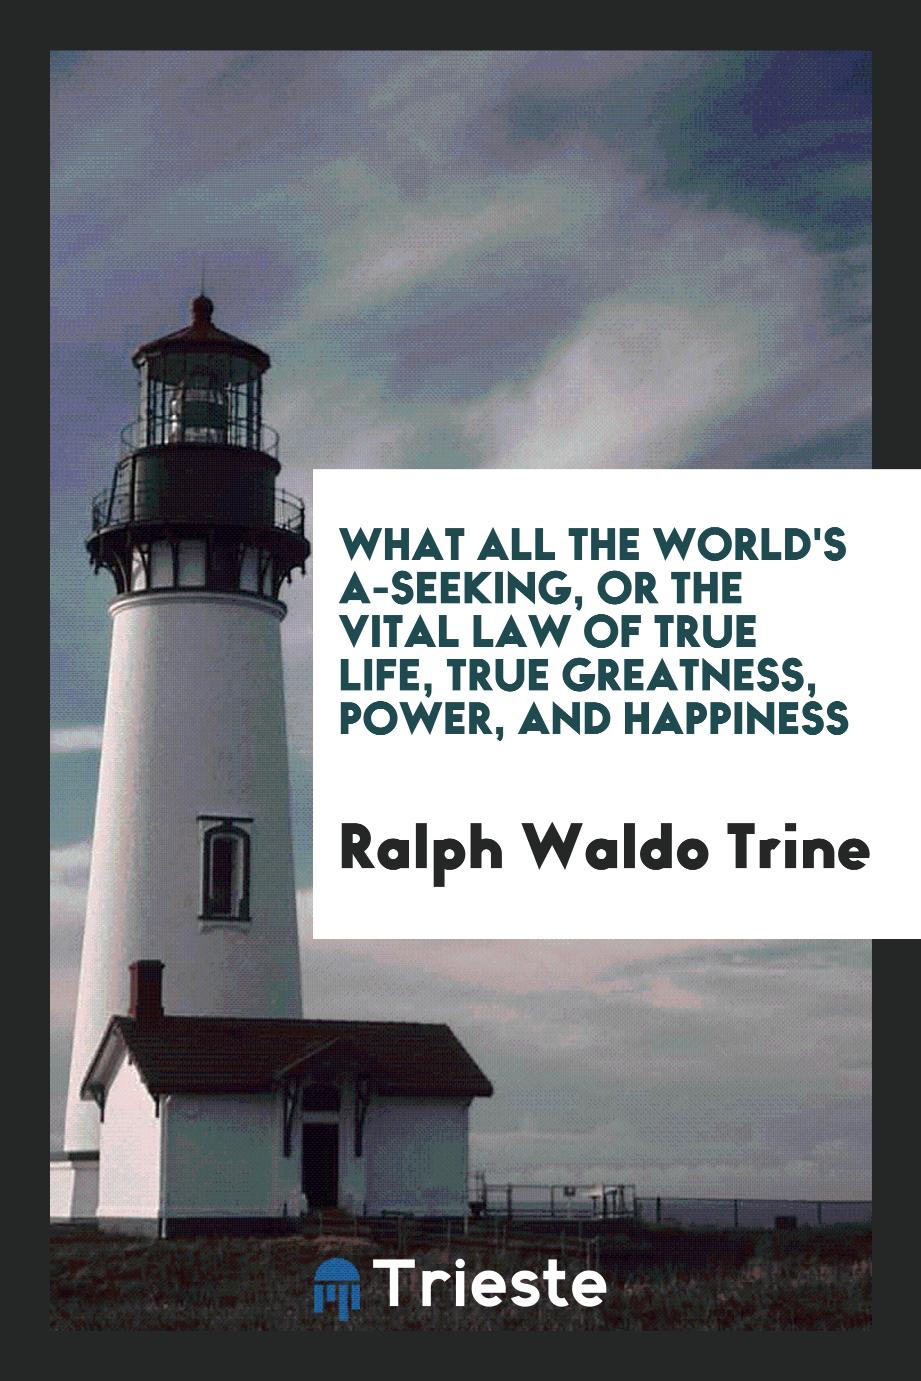 What all the world's a-seeking, or the vital law of true life, true greatness, power, and happiness